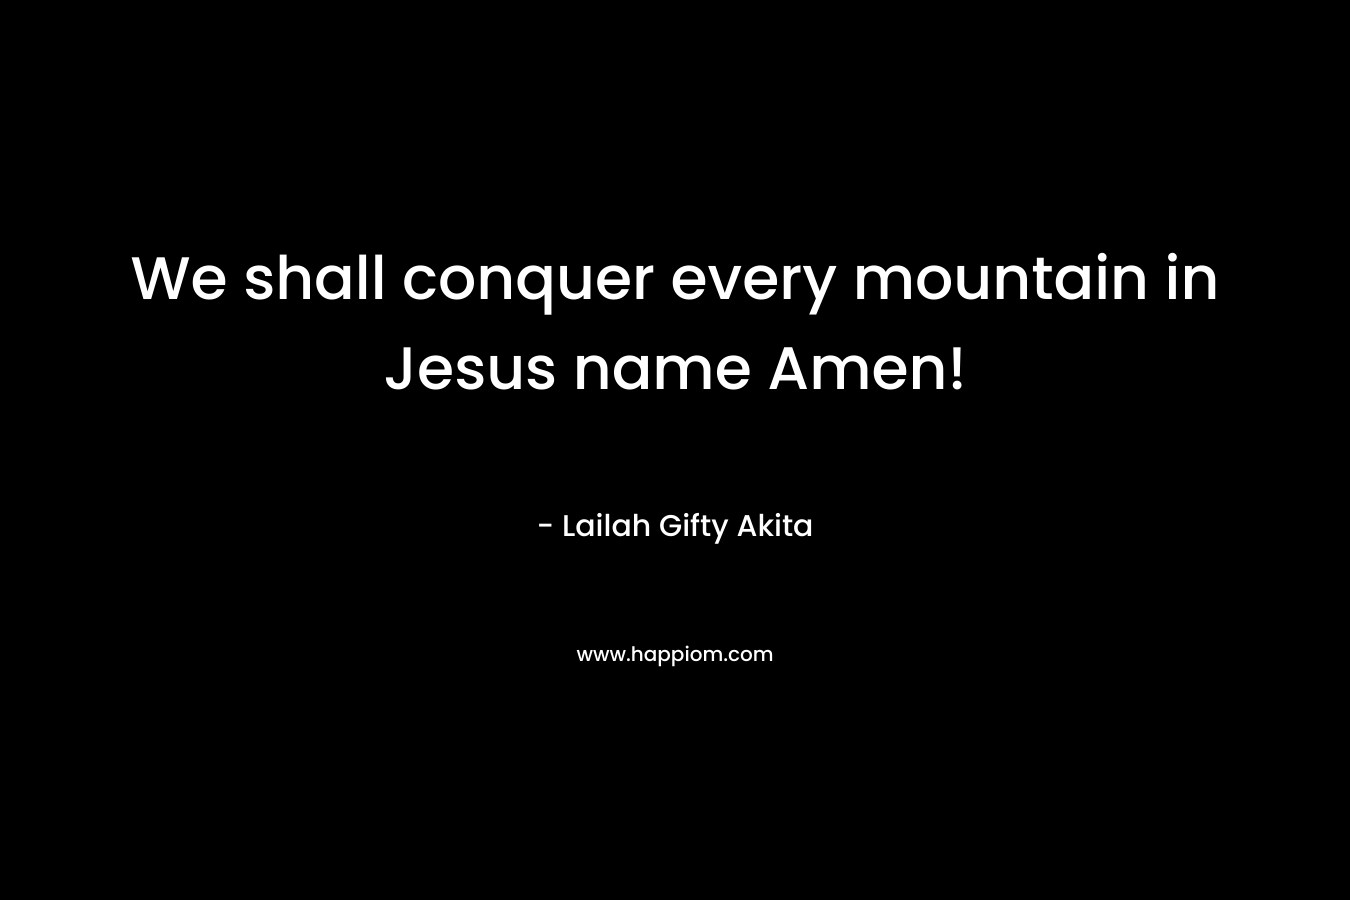 We shall conquer every mountain in Jesus name Amen!